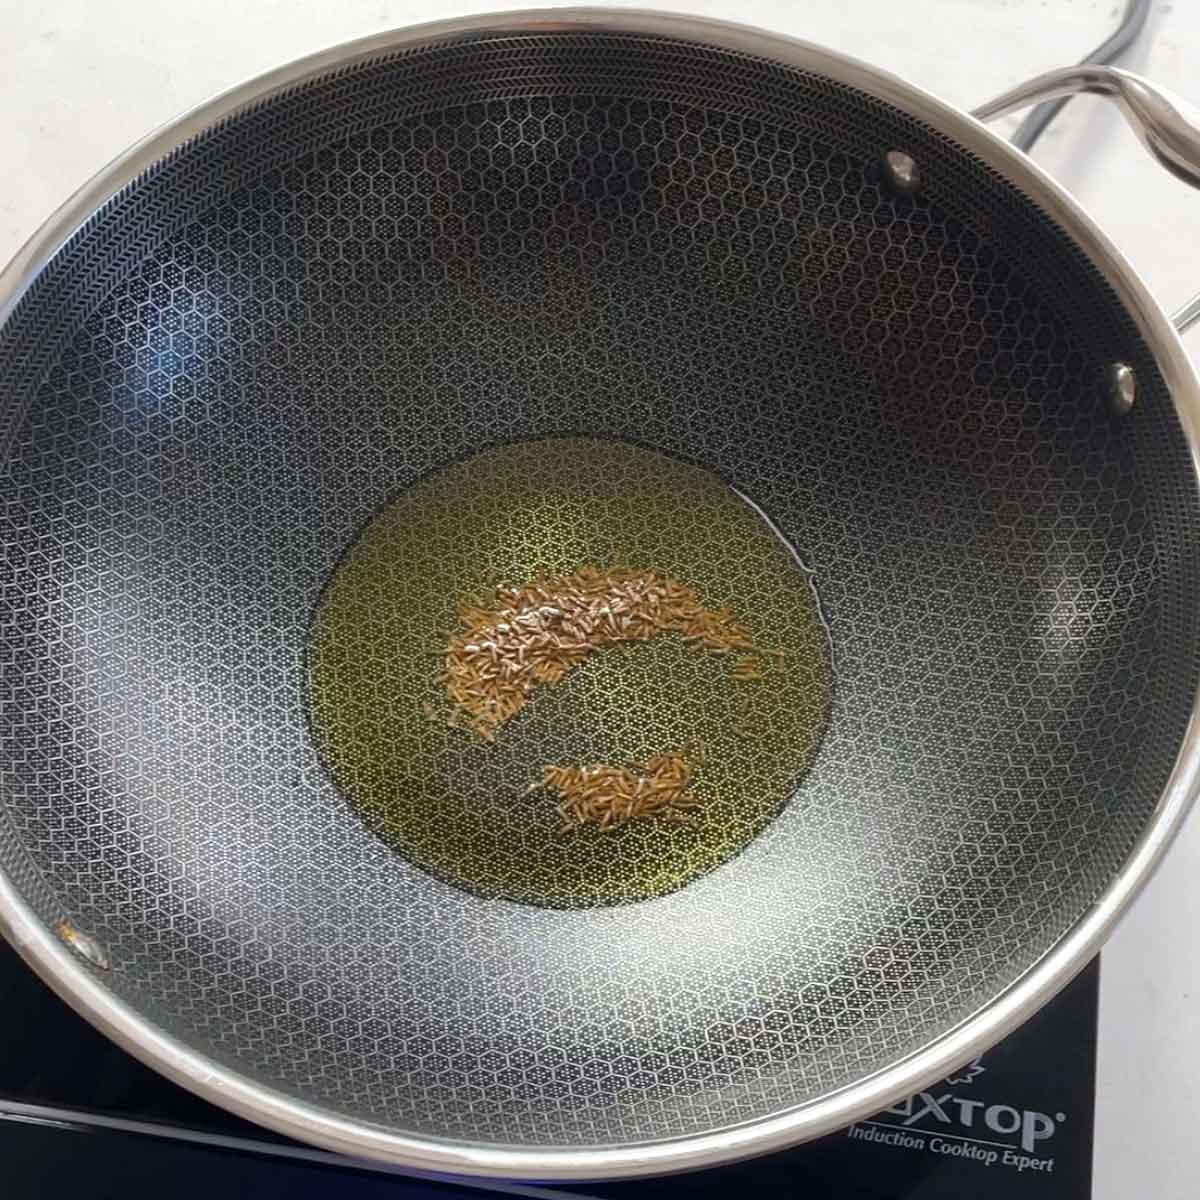 add cumin seeds to the oil